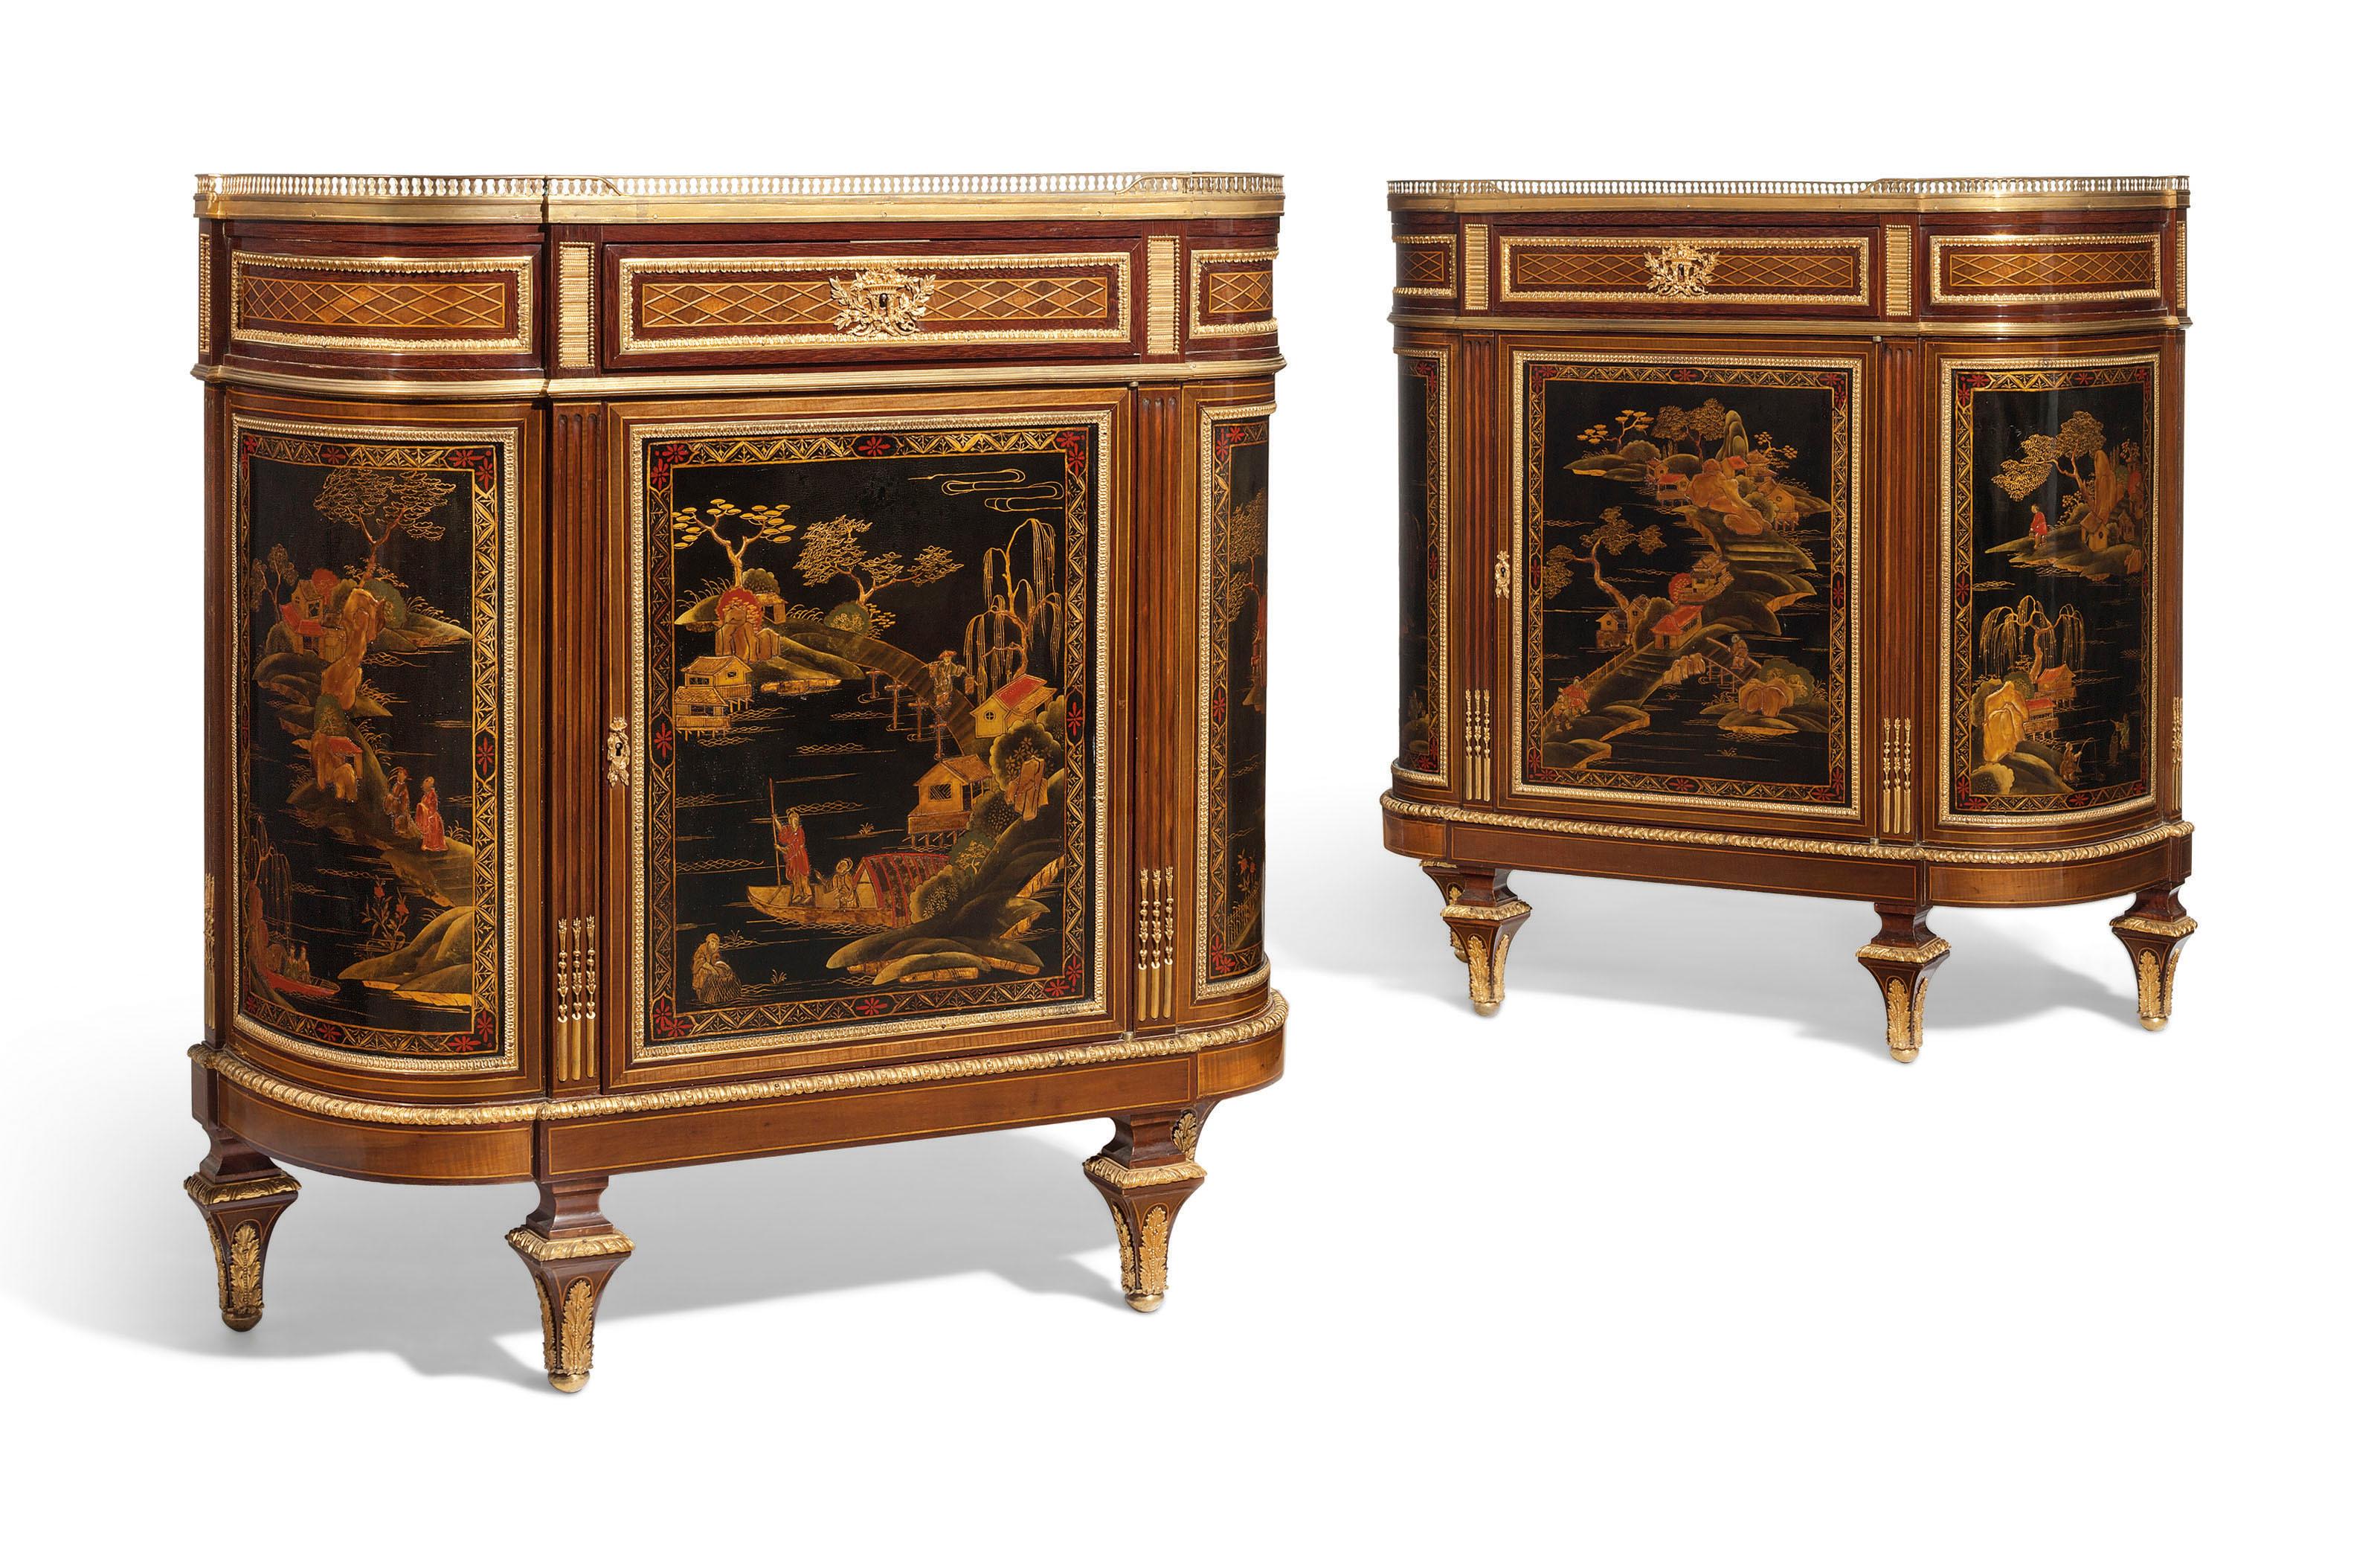 A PAIR OF FRENCH ORMOLU AND GILT-LACQUER-MOUNTED AMARANTH, BOIS SATINÉ AND PARQUETRY SIDE CABINETS
OF Louis XVI STYLE, LAST QUARTER 19TH CENTURY

Each item has a grey-veined white marble top with pierced gallery, there is a frieze drawer above